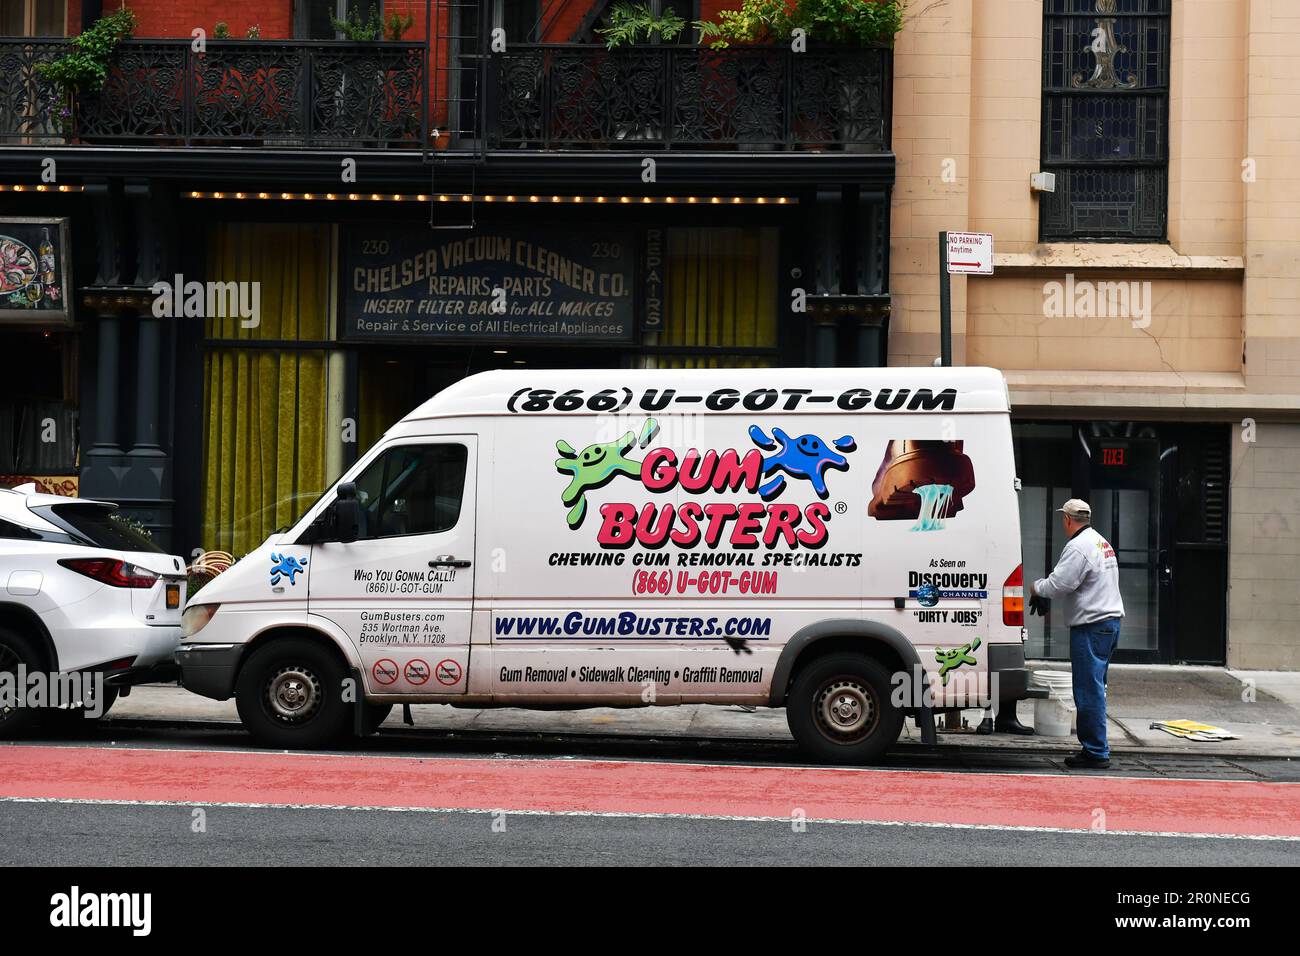 Gum-Busters-Truck in New York City, USA Stockfoto